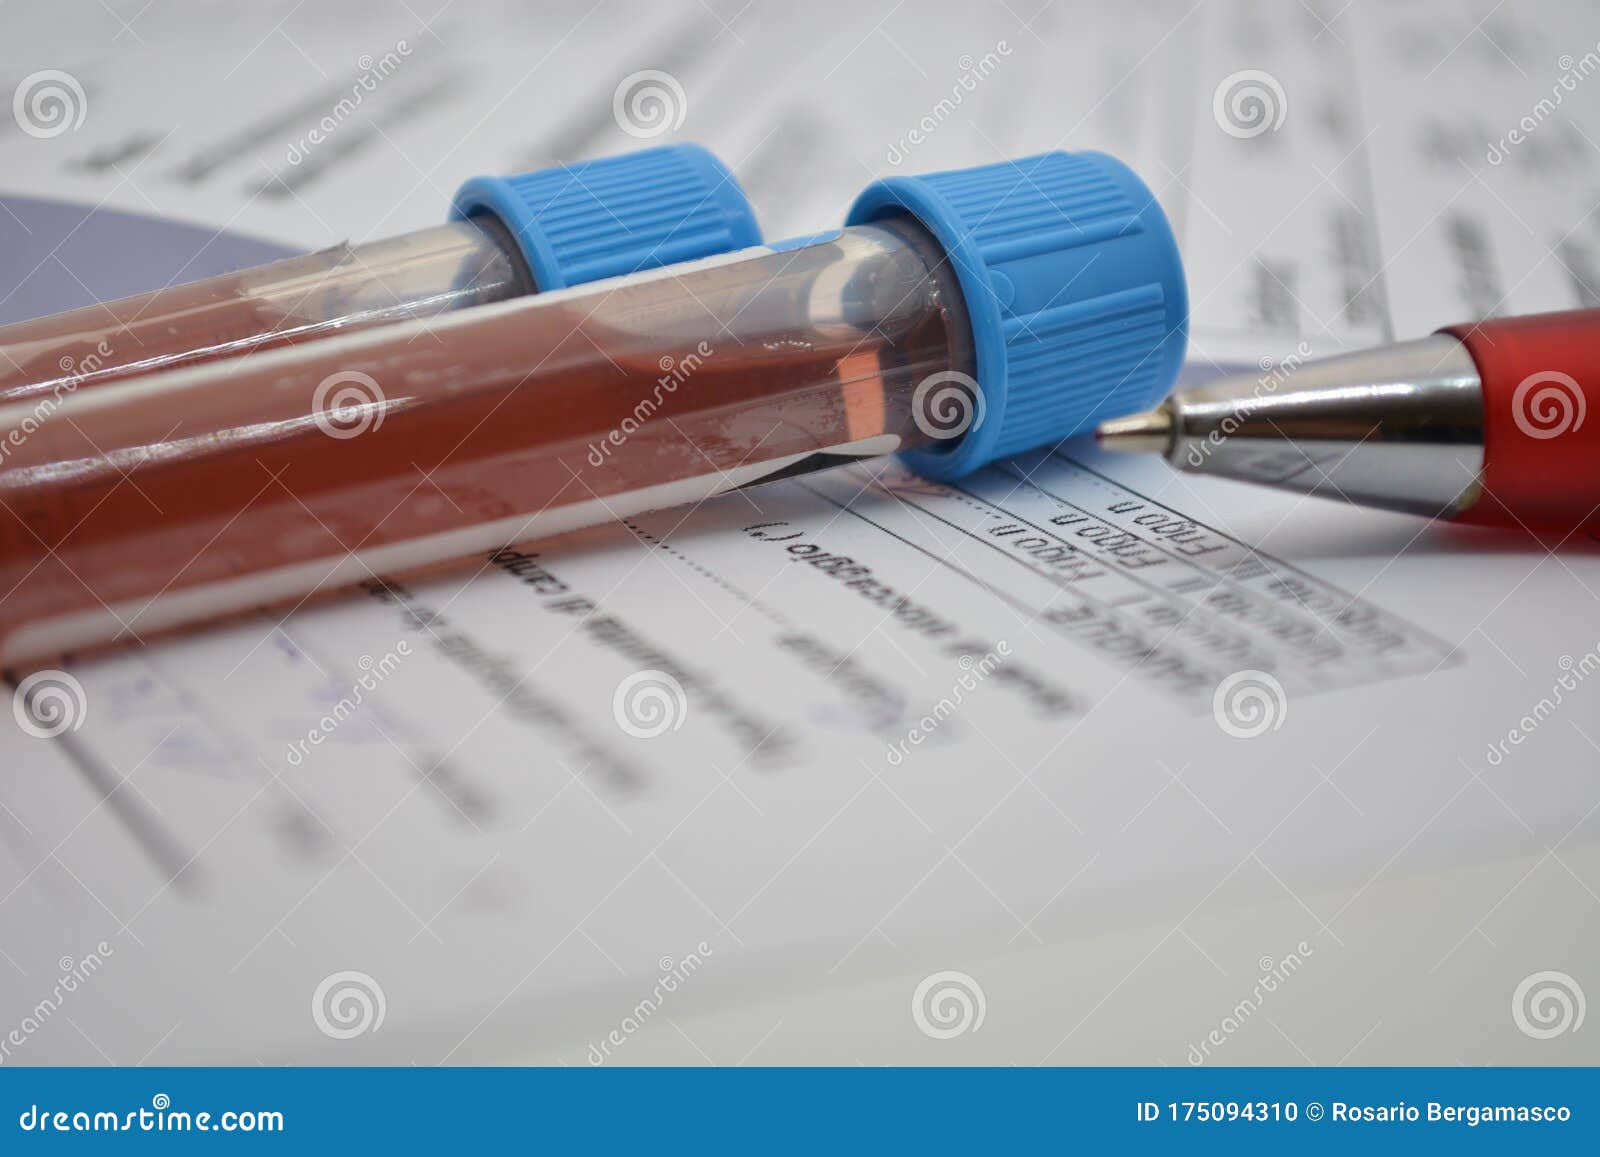 Blood Tests in a Test Tube Vaccine Medical Laboratory Covid 19 Virus ...